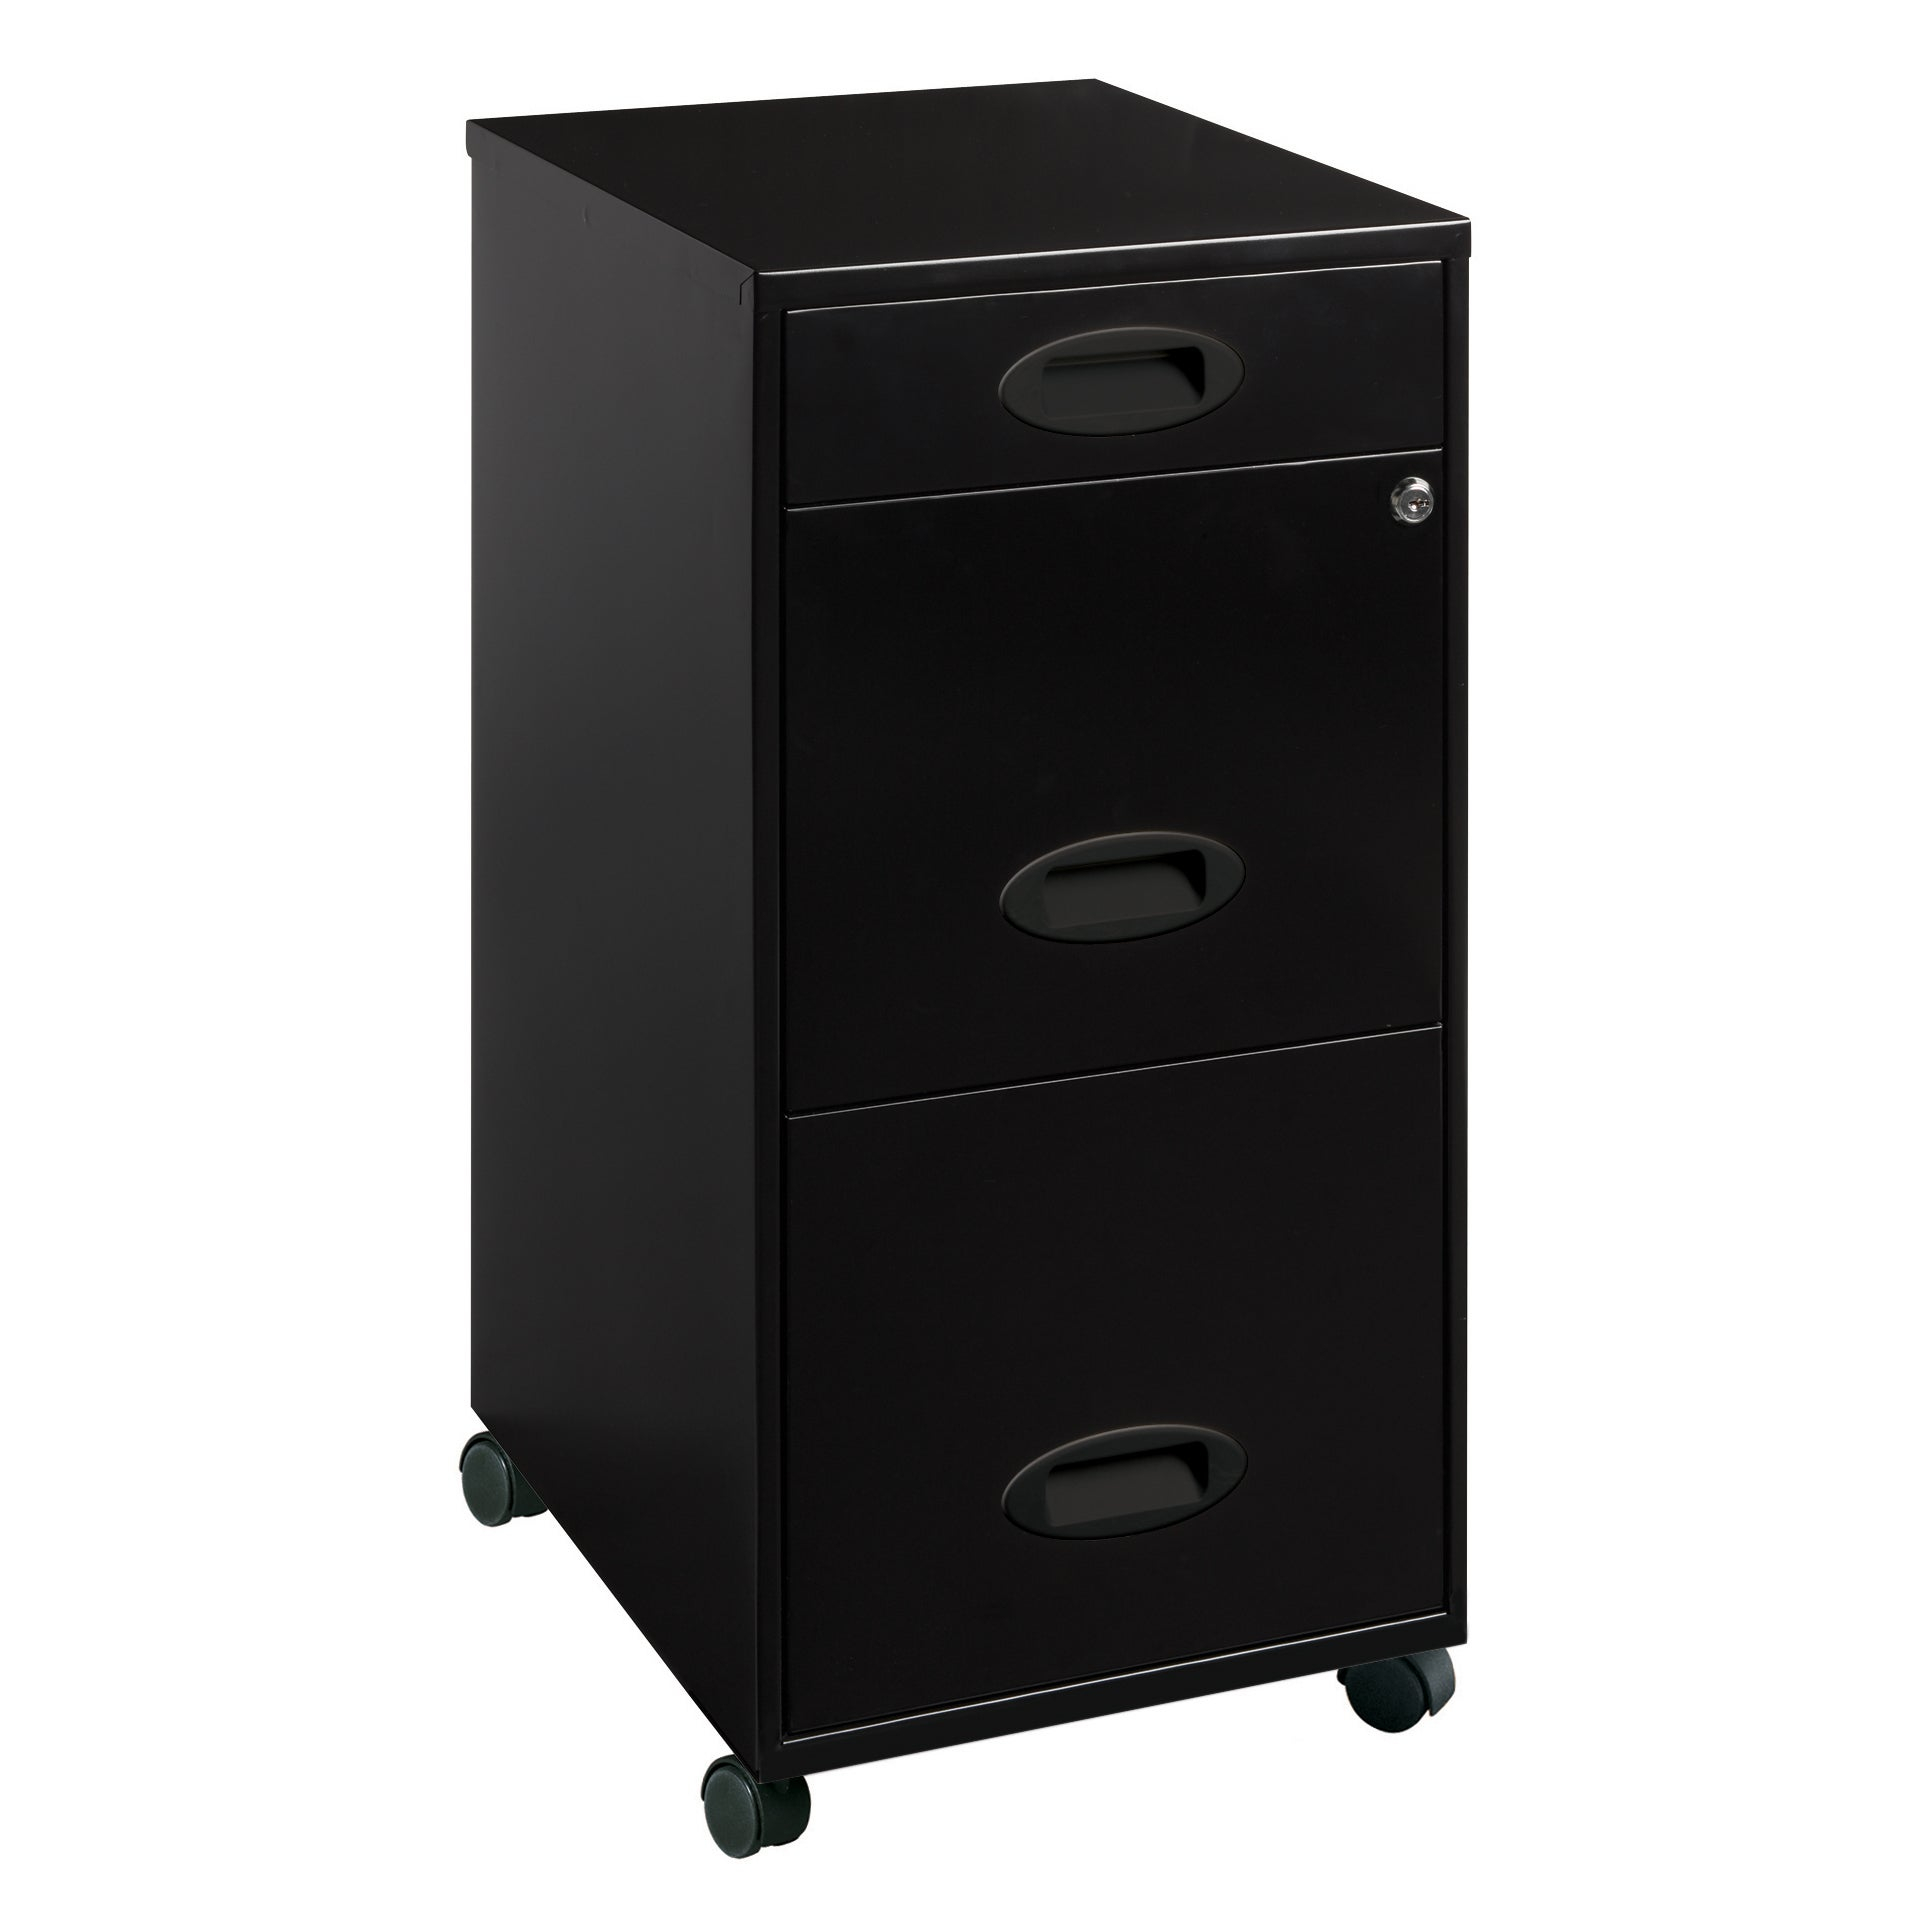 Space Solutions Black 3 Drawer Mobile File Cabinet intended for proportions 1916 X 1916